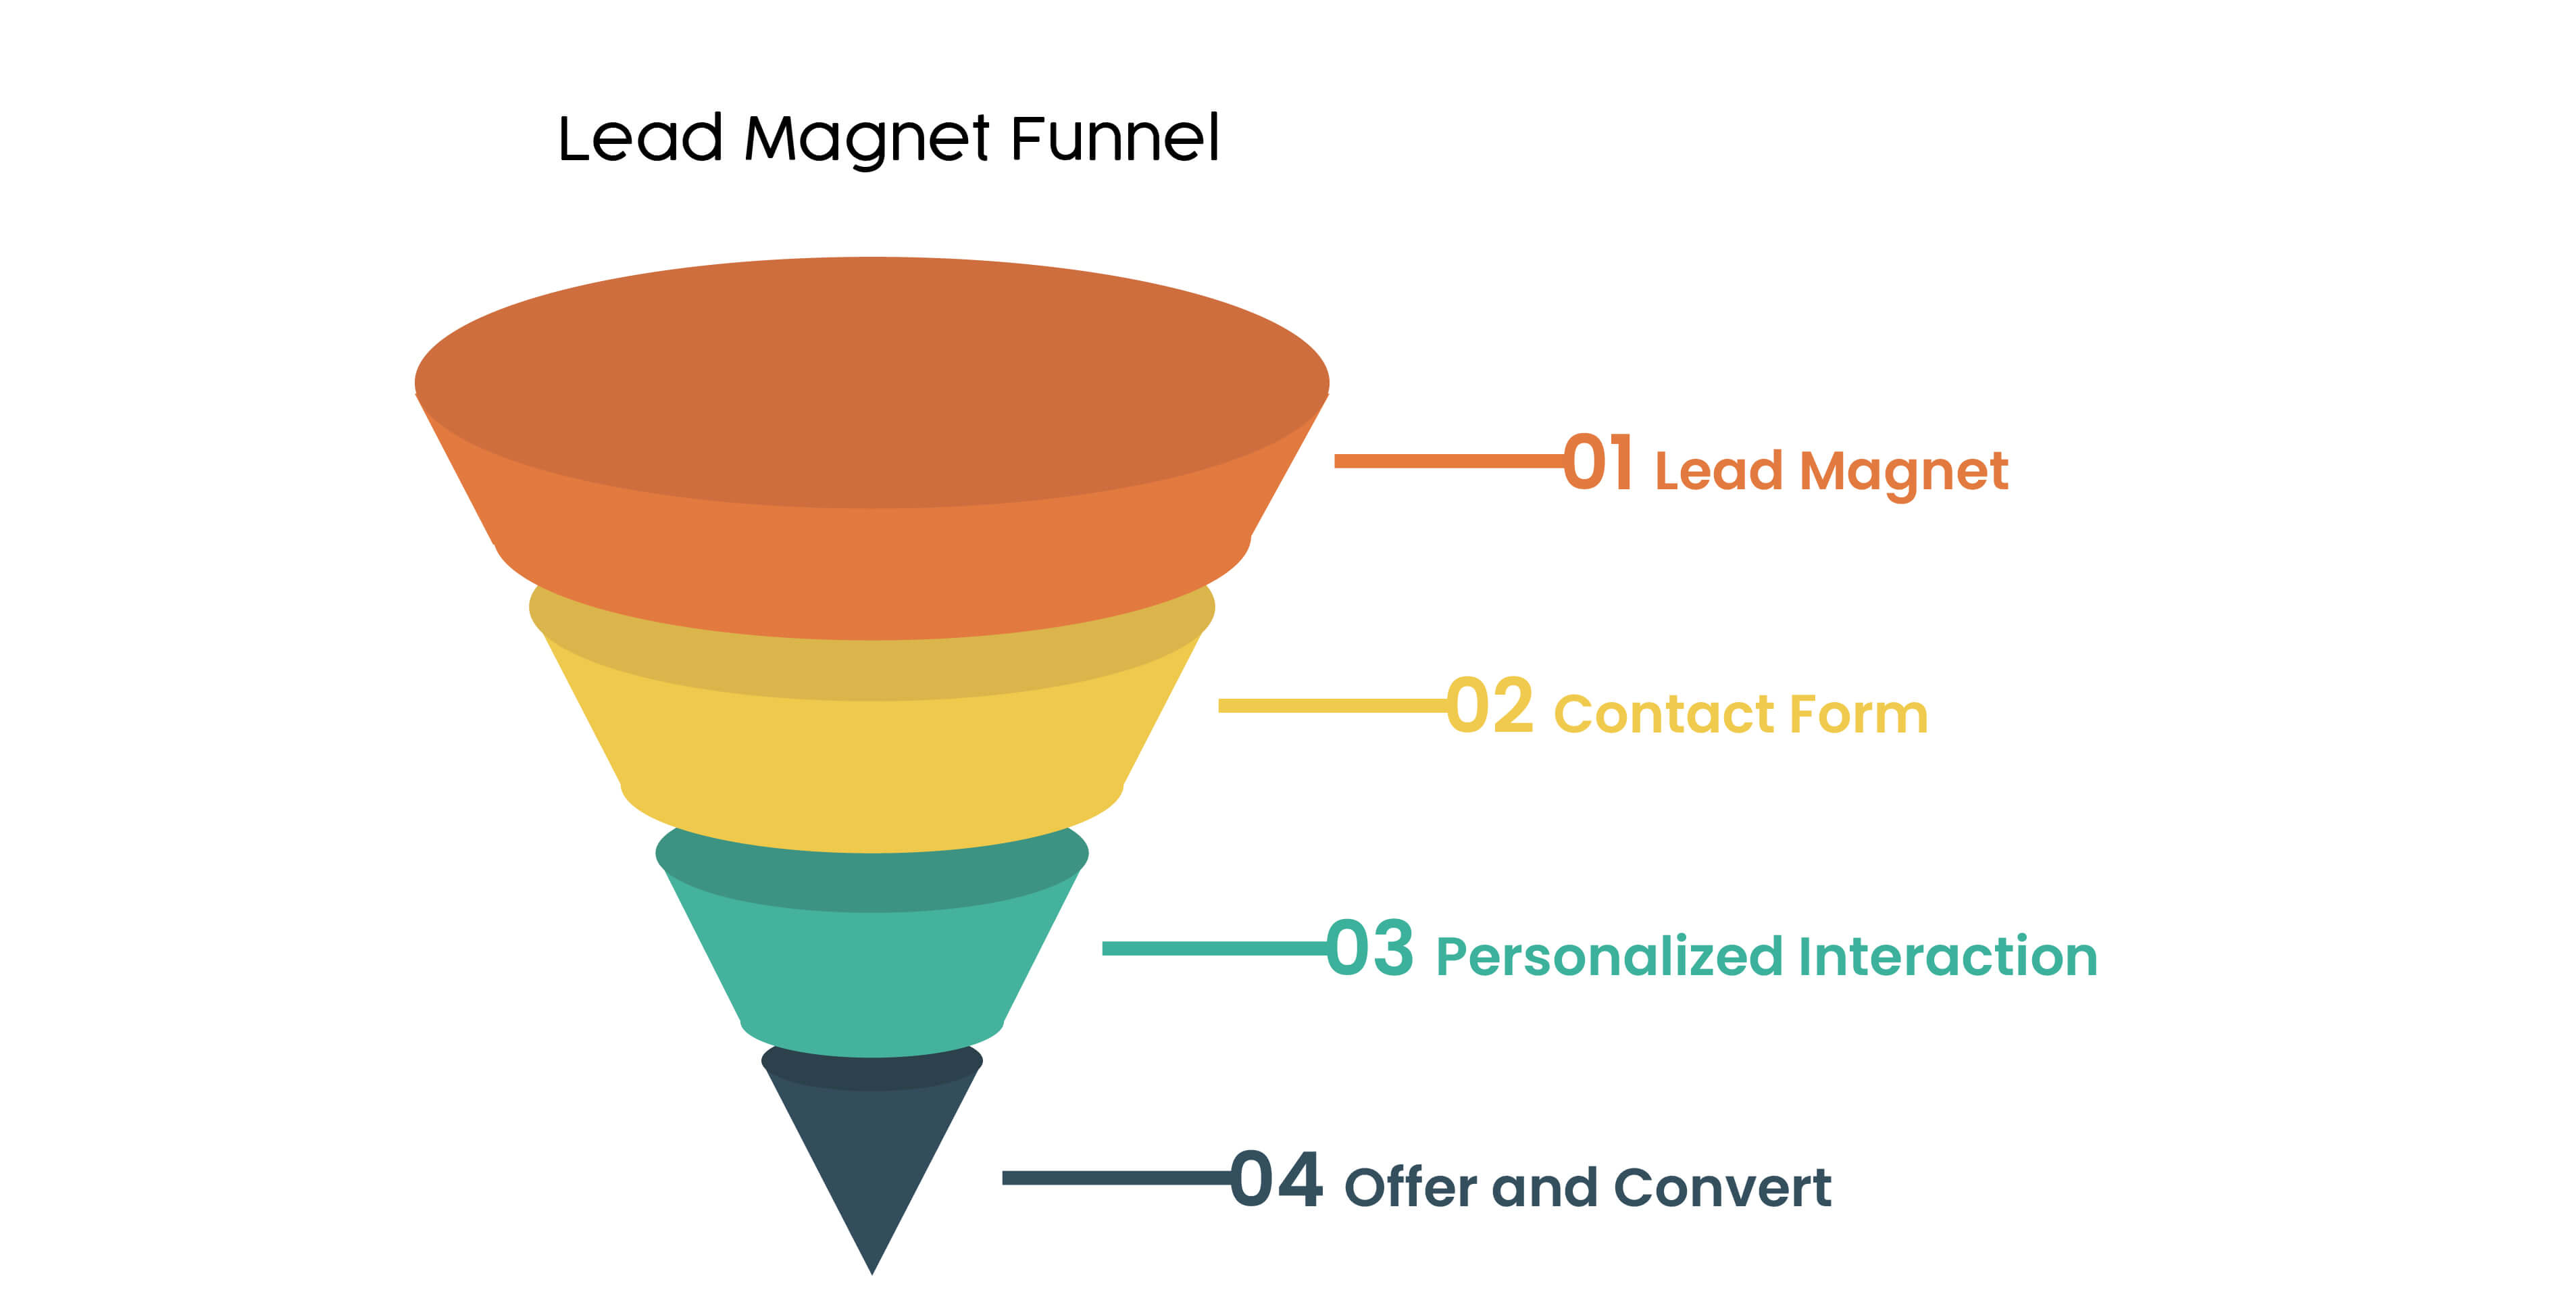 Lead magnet sales funnel template